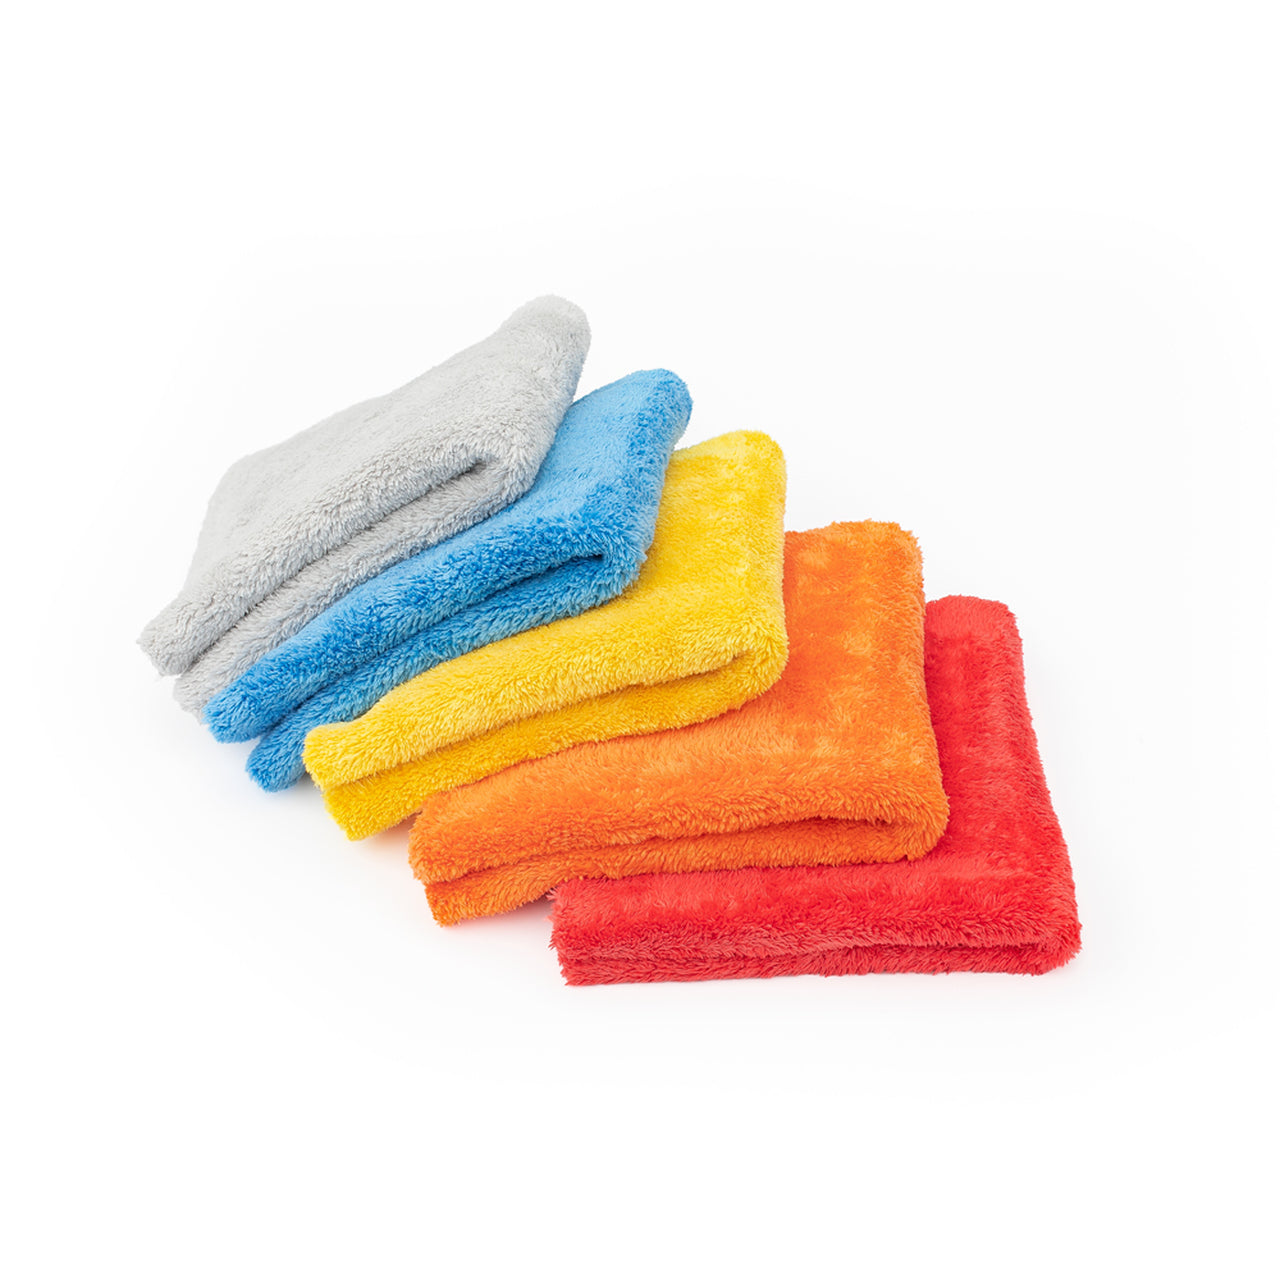 Detail King - Now Available in Quart Sizes - Micro Klean Microfiber  Detergent will safely and effectively clean and prep your microfiber towels  for the next job!